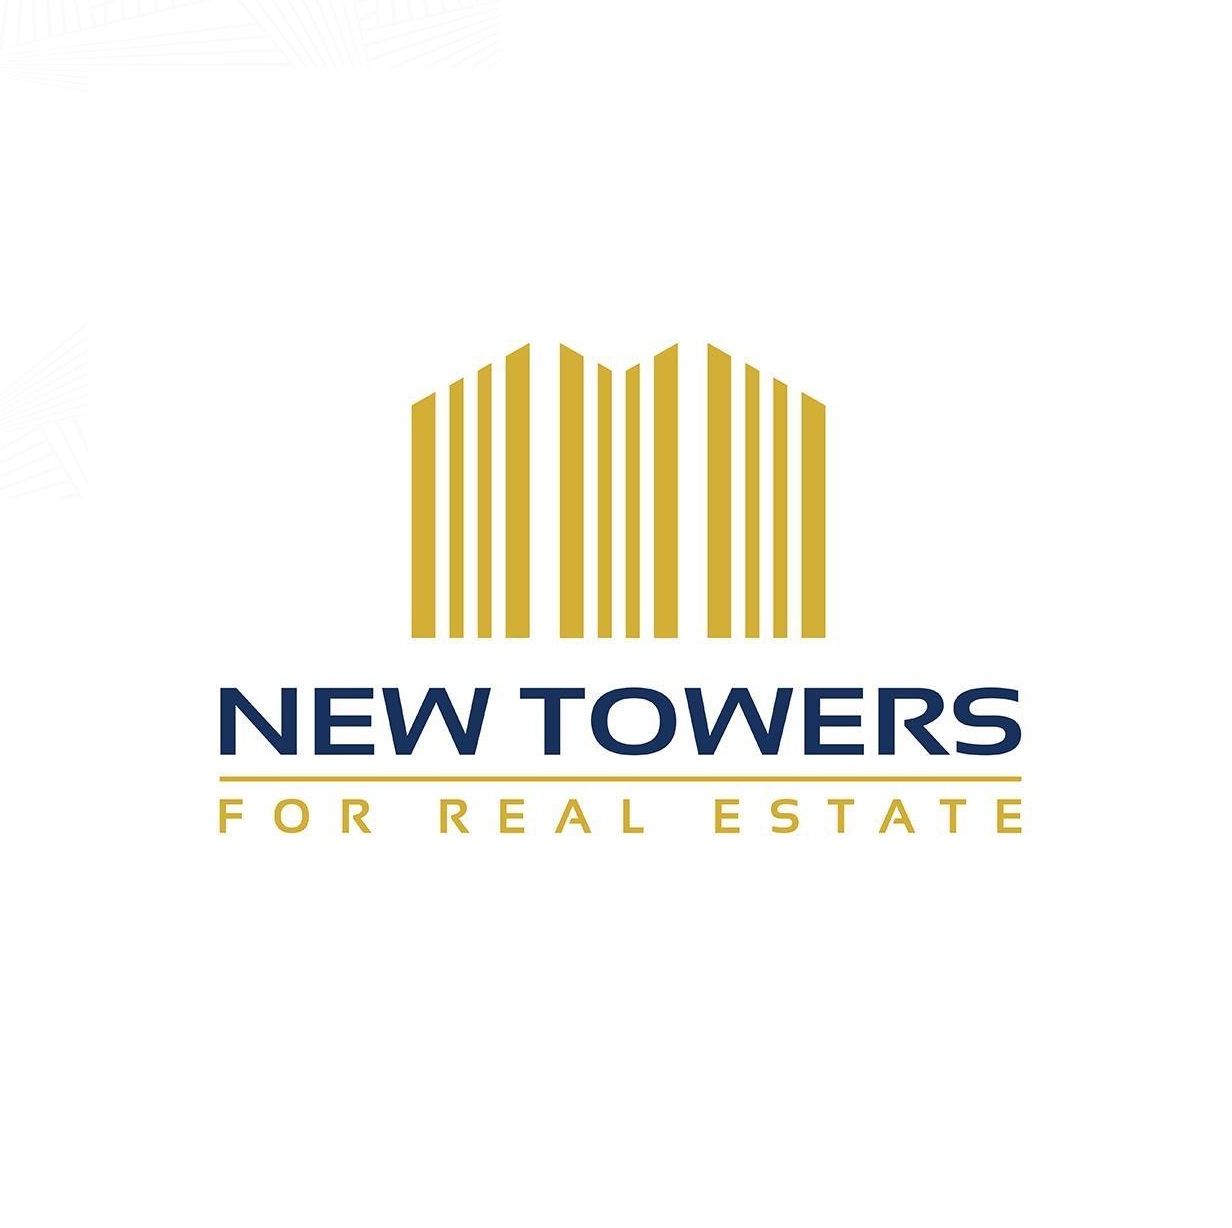 New towers